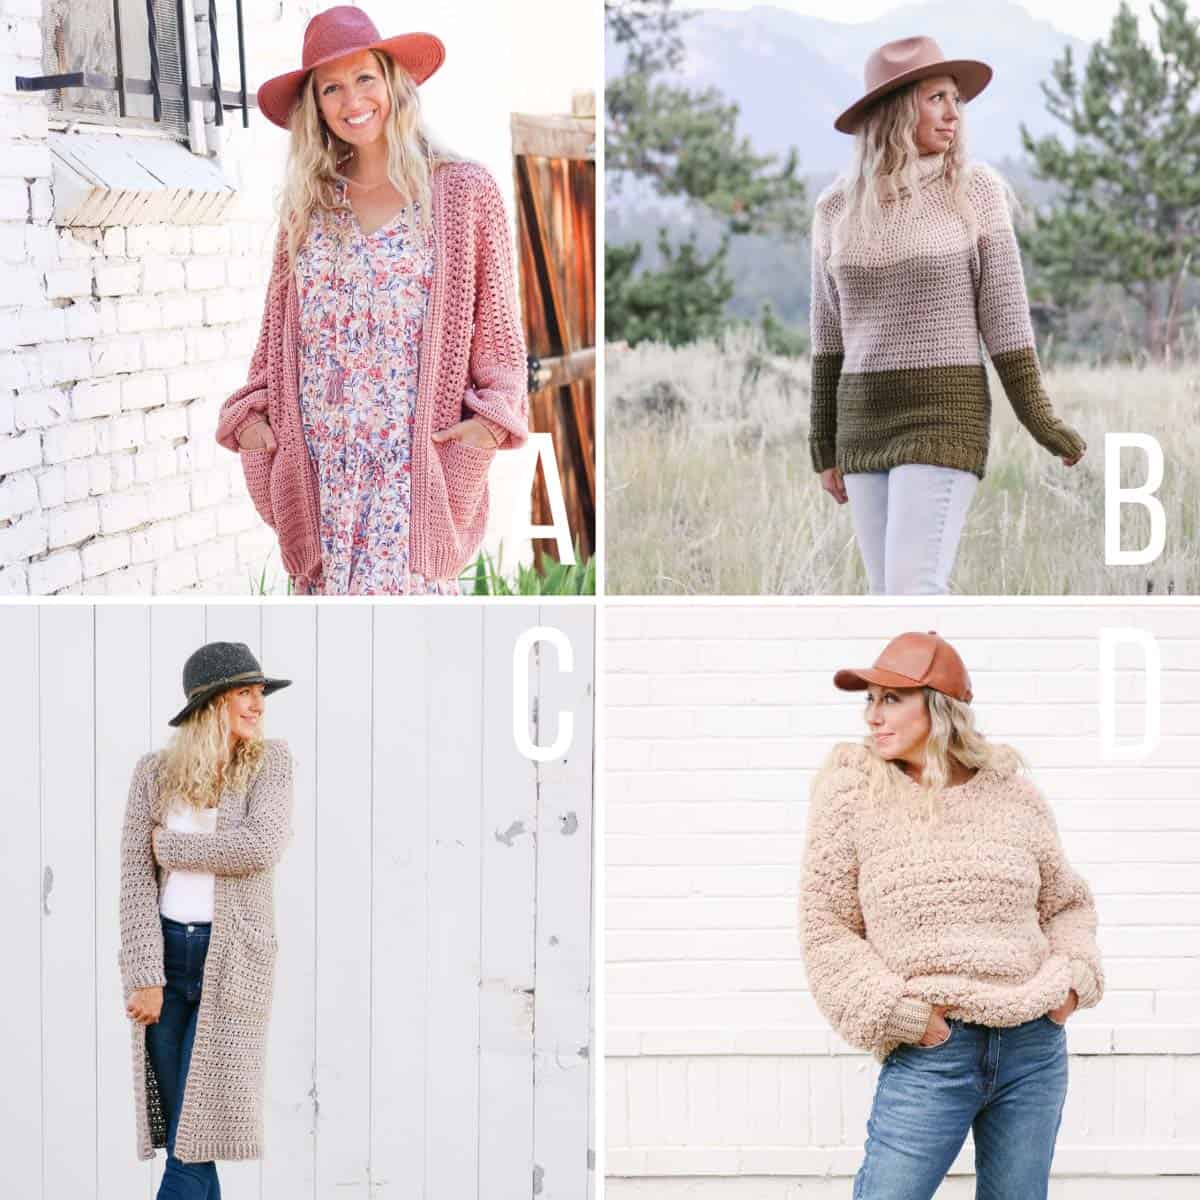 Grid of four free crochet sweater patterns. One is a baggy crochet cardigan, one is a turtleneck crochet pullover sweater, one is a one crochet duster and one is a sherpa crochet hooded sweatshirt.